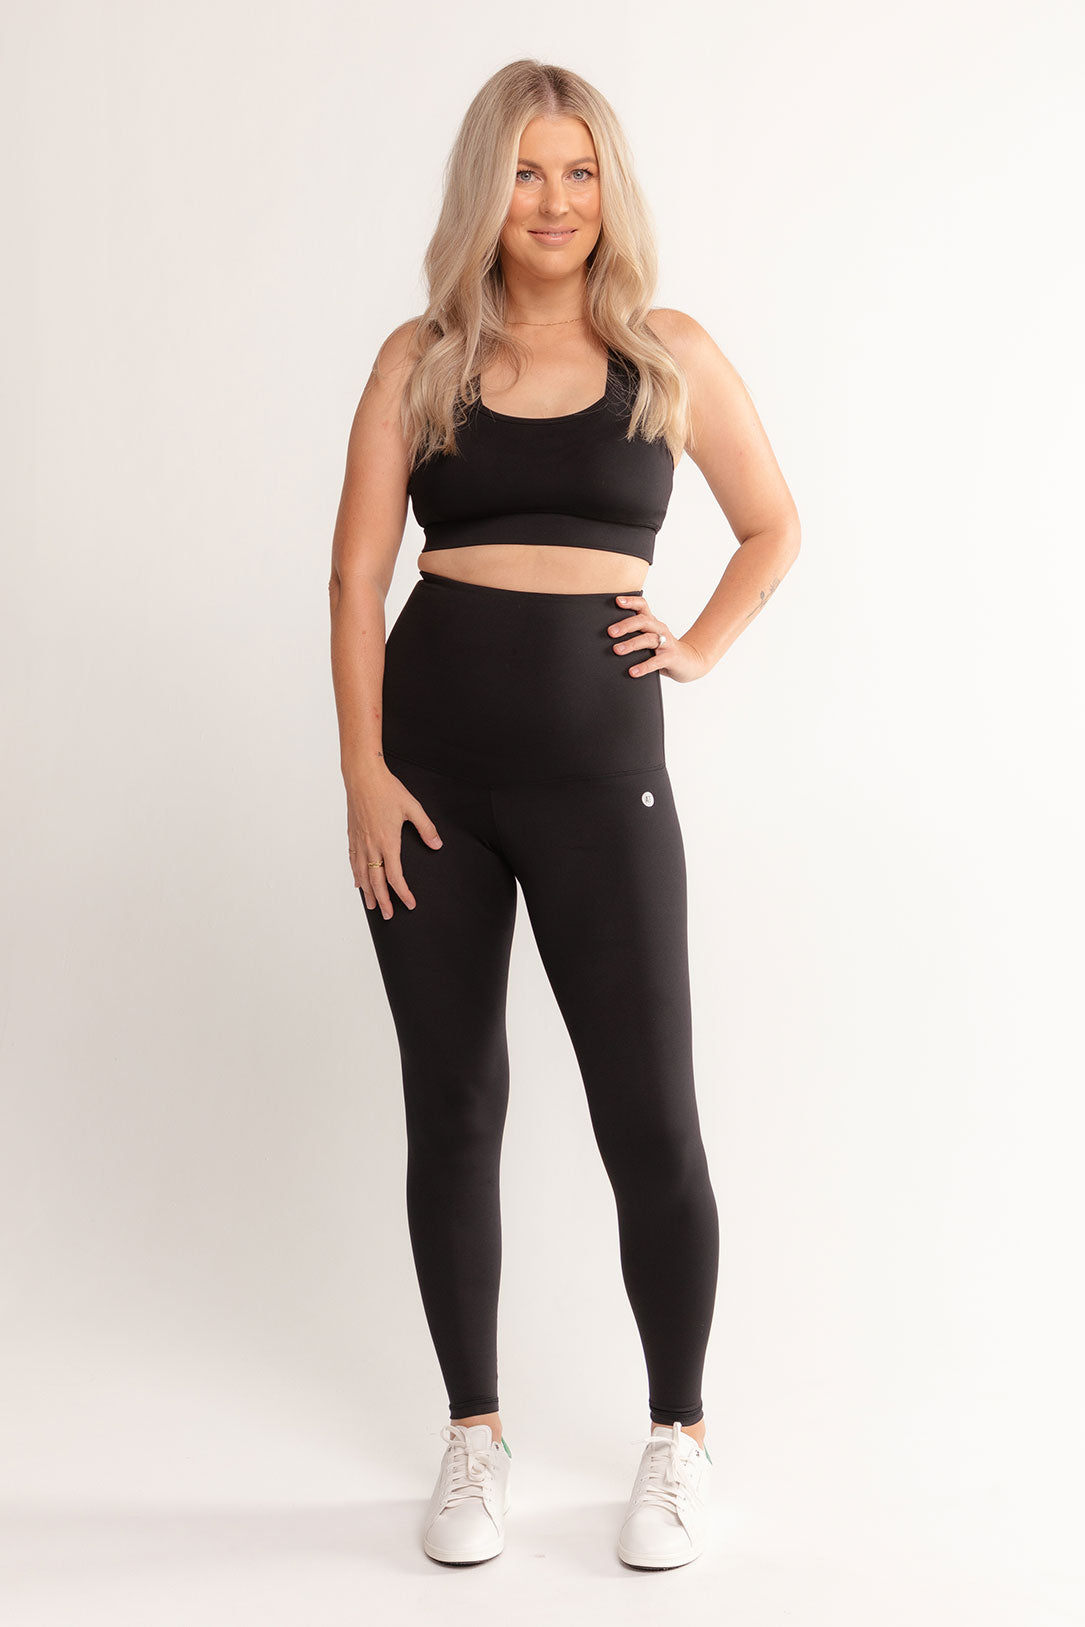 Postnatal Recovery Full Length Tights, Active Truth